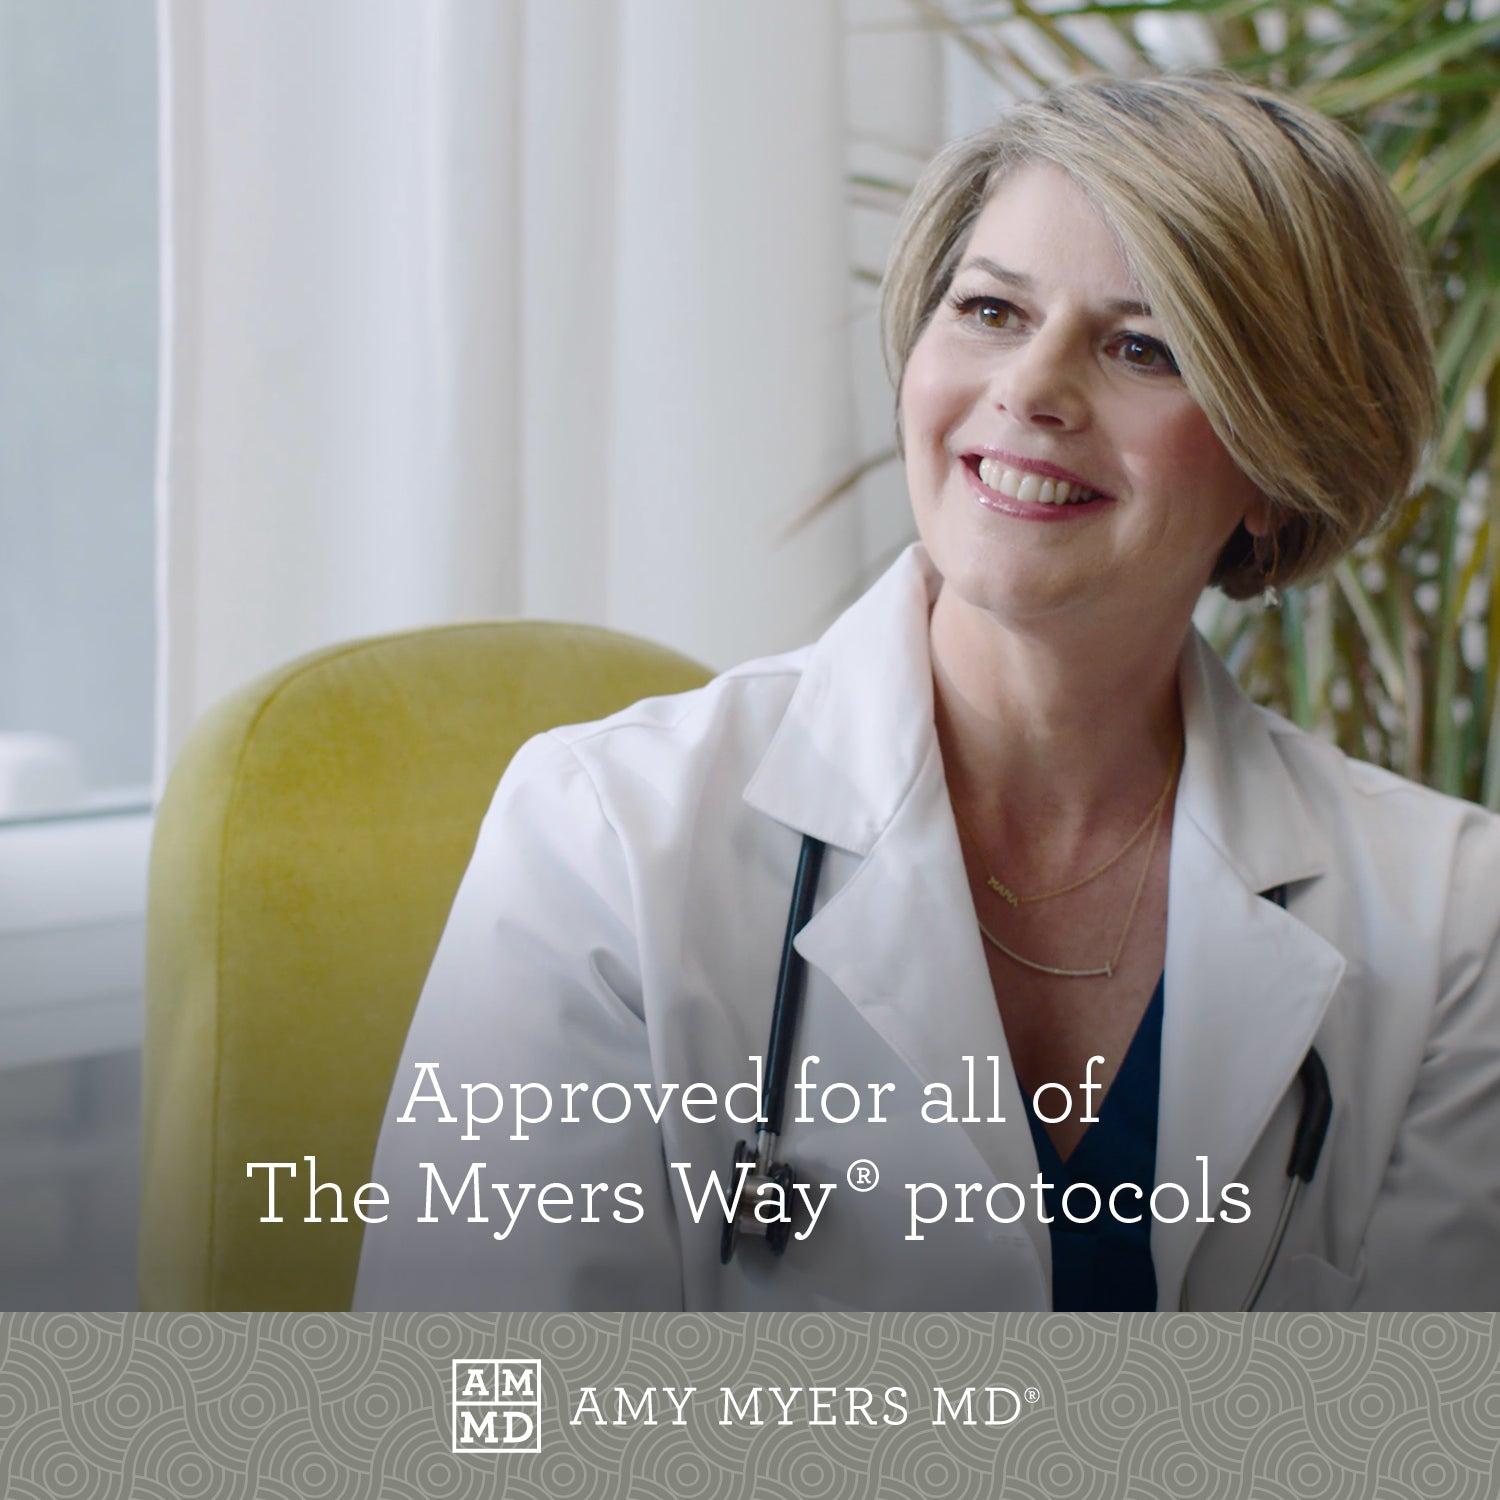 Dr Myers Smiling - Approved for all of The Myers Way® Protocols - Amy Myers MD